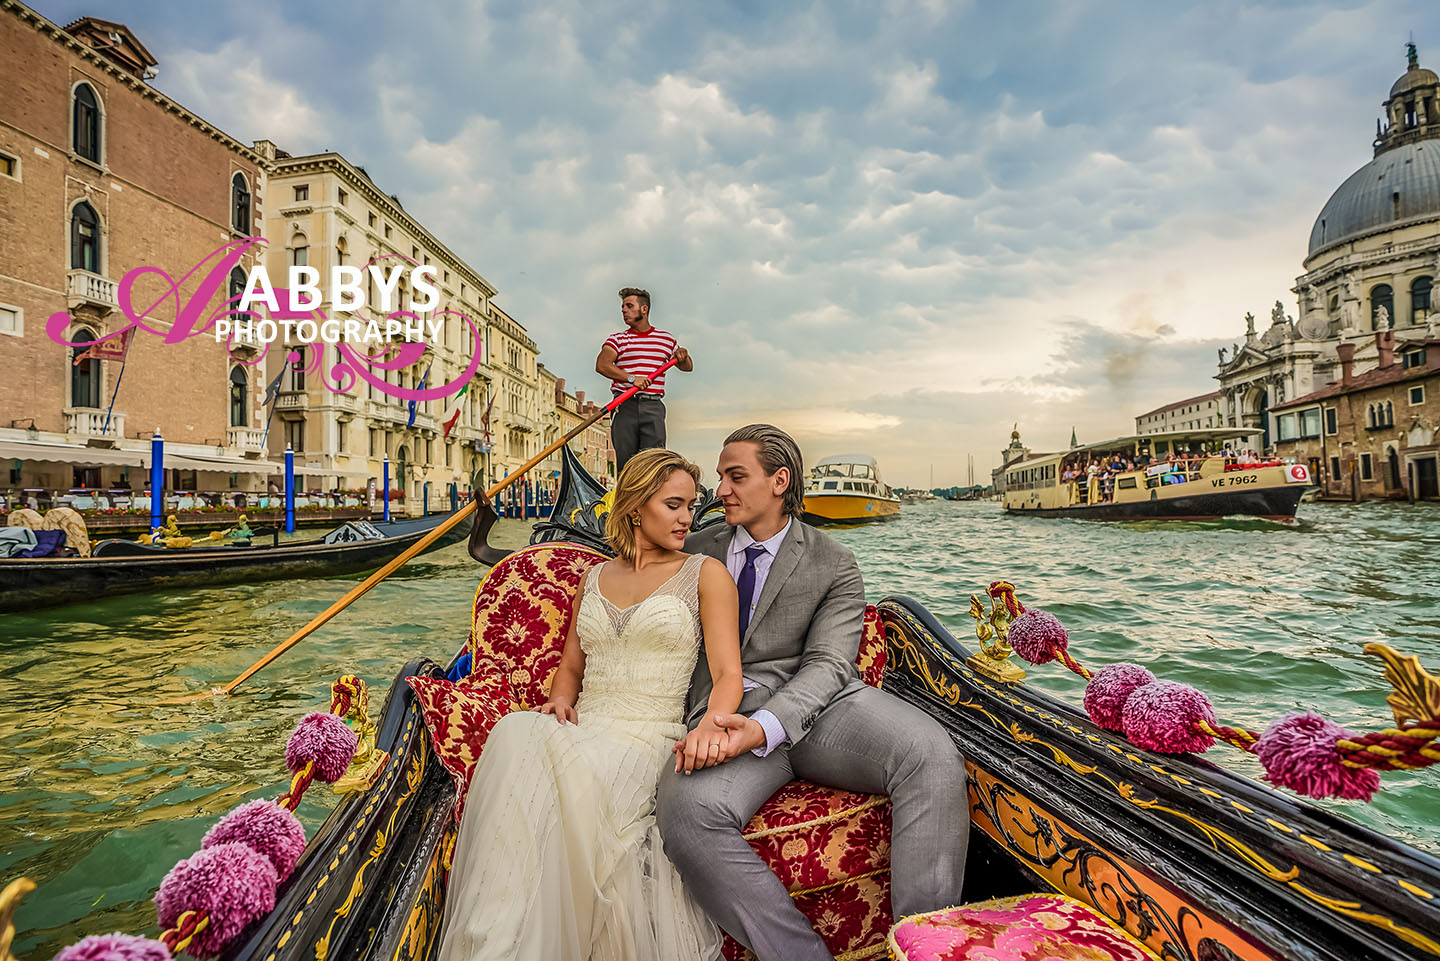 Abbys Photography can make you feel like your wedding or engagement is in Venice instead of Los Angeles. Call 661-342-4945  